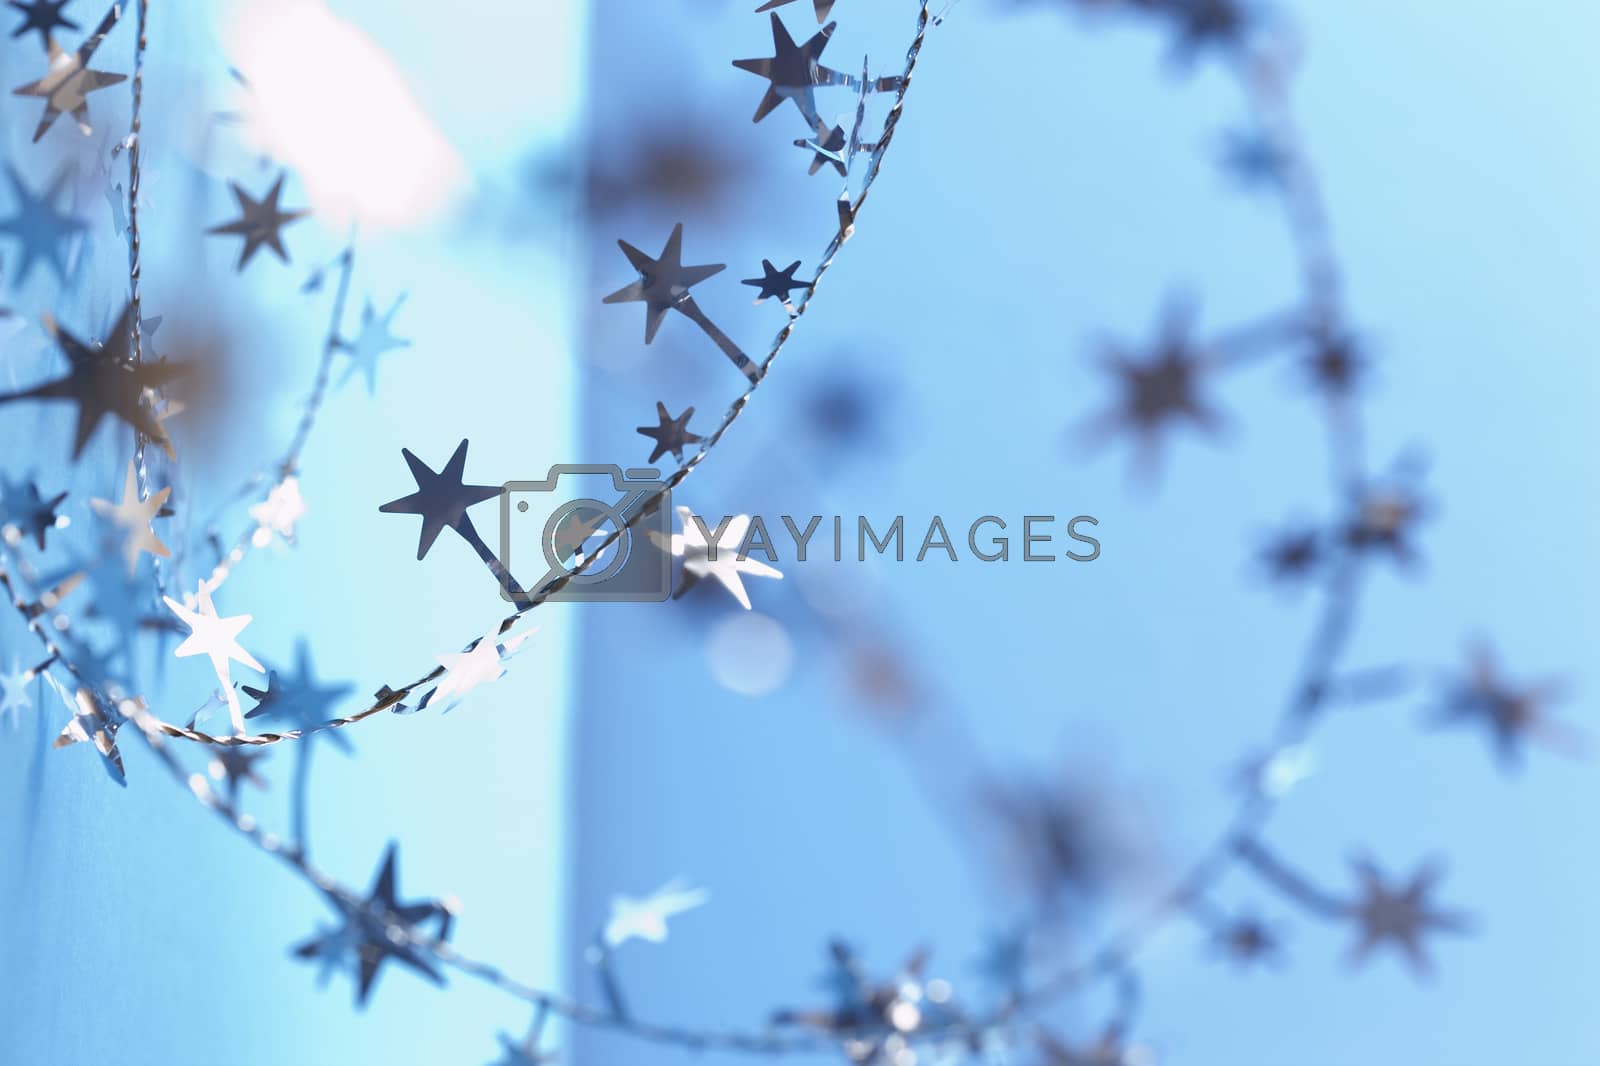 Royalty free image of Christmas star decorations by moodboard